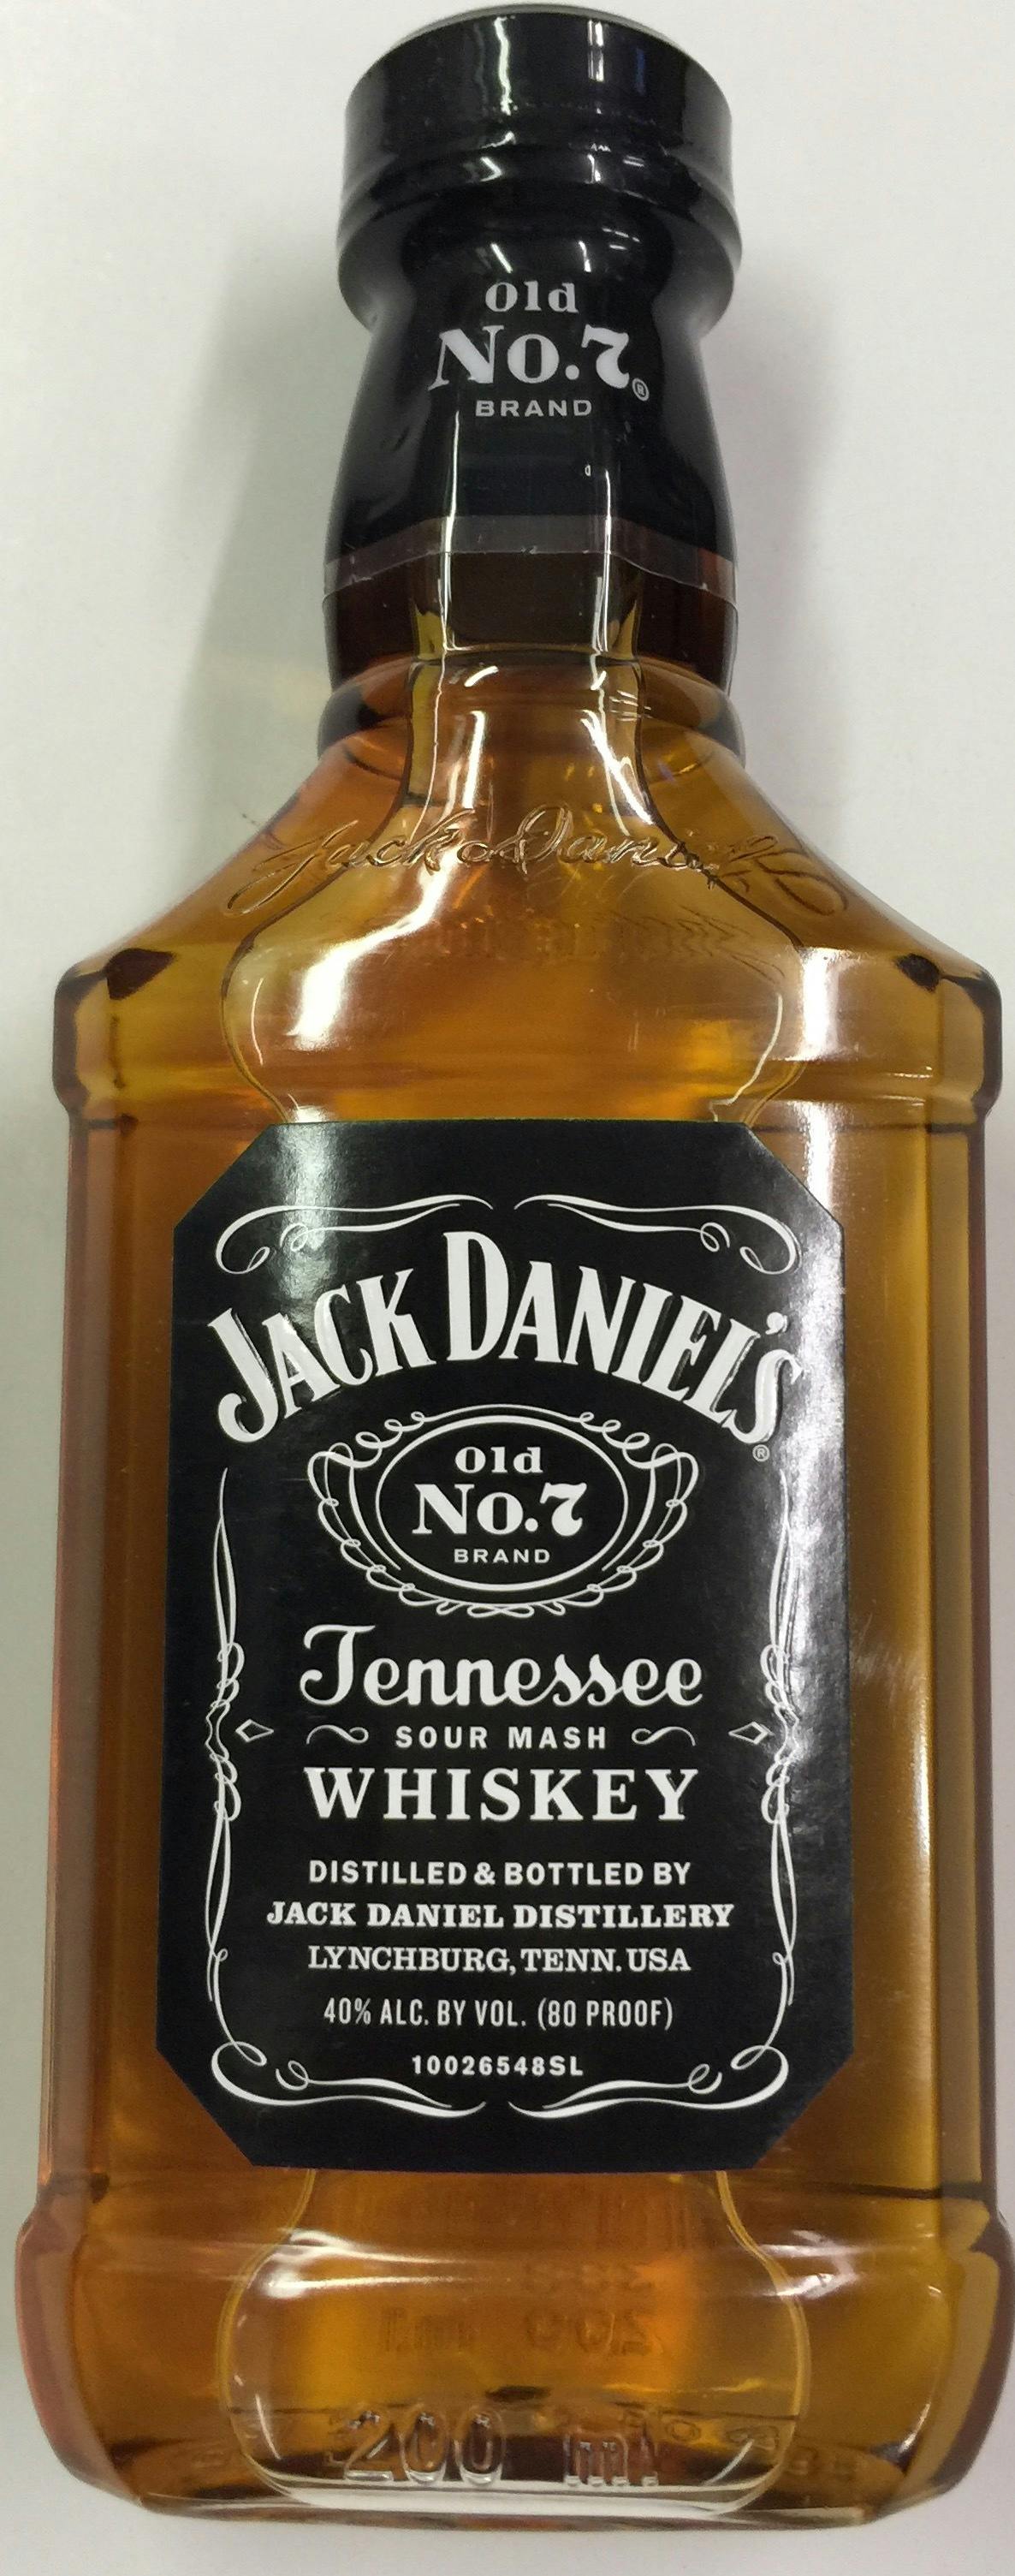 Jack Daniel's Old No. 7 Tennessee Whiskey NV 50 ml.